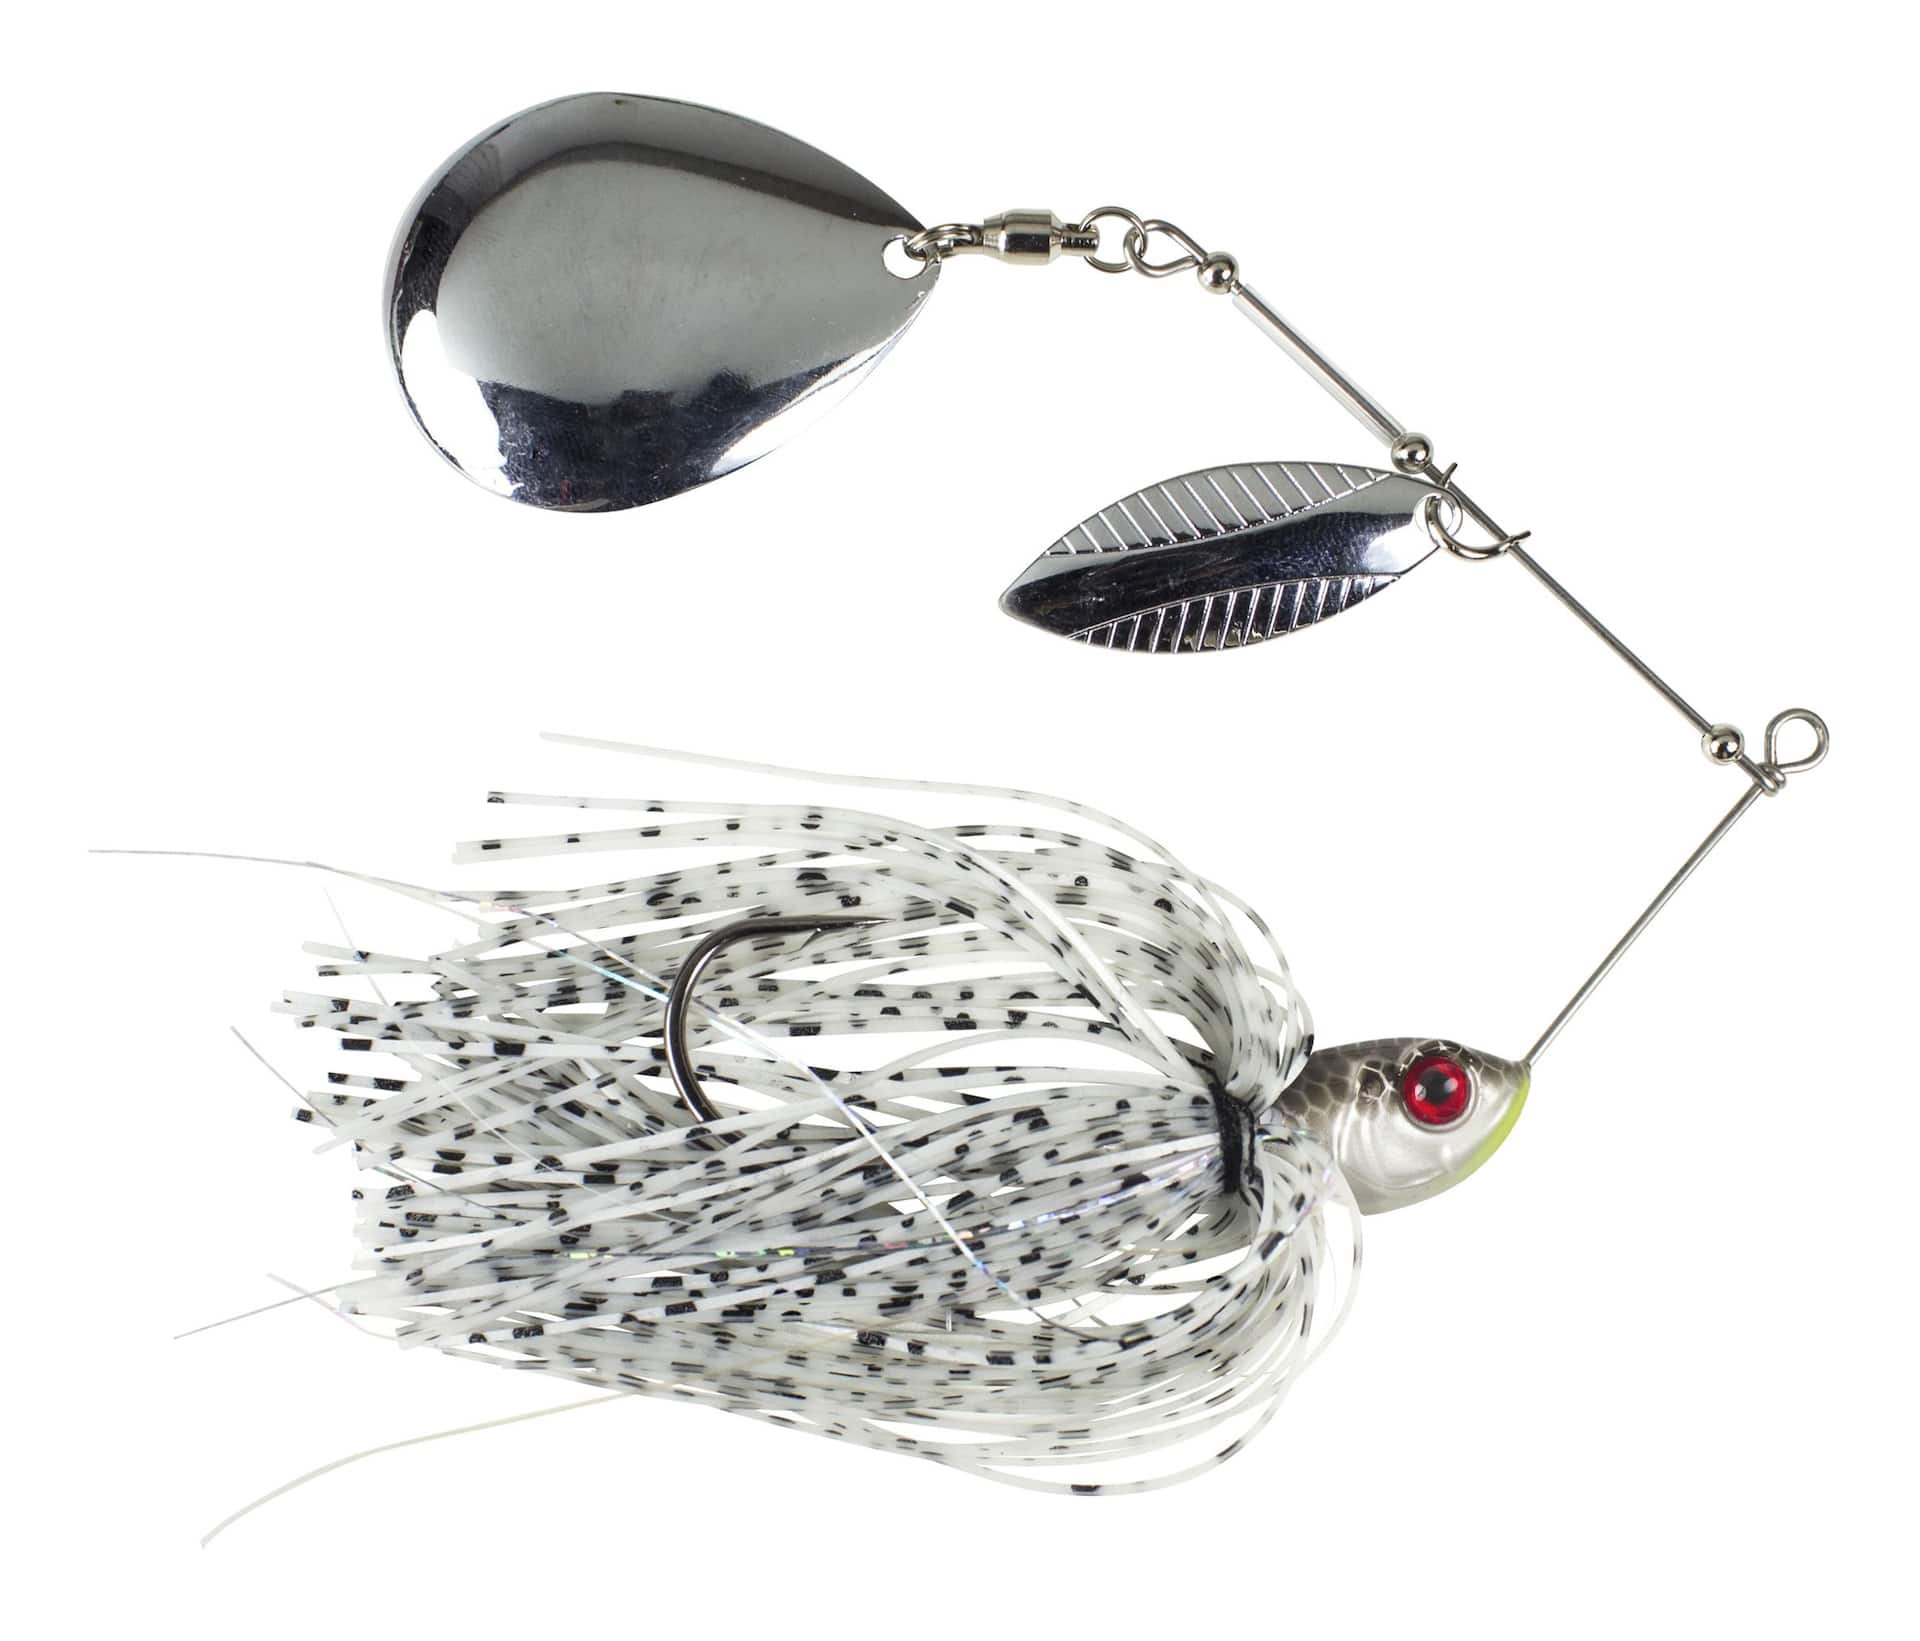 https://media-www.canadiantire.ca/product/playing/fishing/fishing-lures/0771287/xcalibur-xtr-spinnerbait-shiner-3-8-oz-72bf147b-c45a-4a4f-8d68-3bc538a0cd51-jpgrendition.jpg